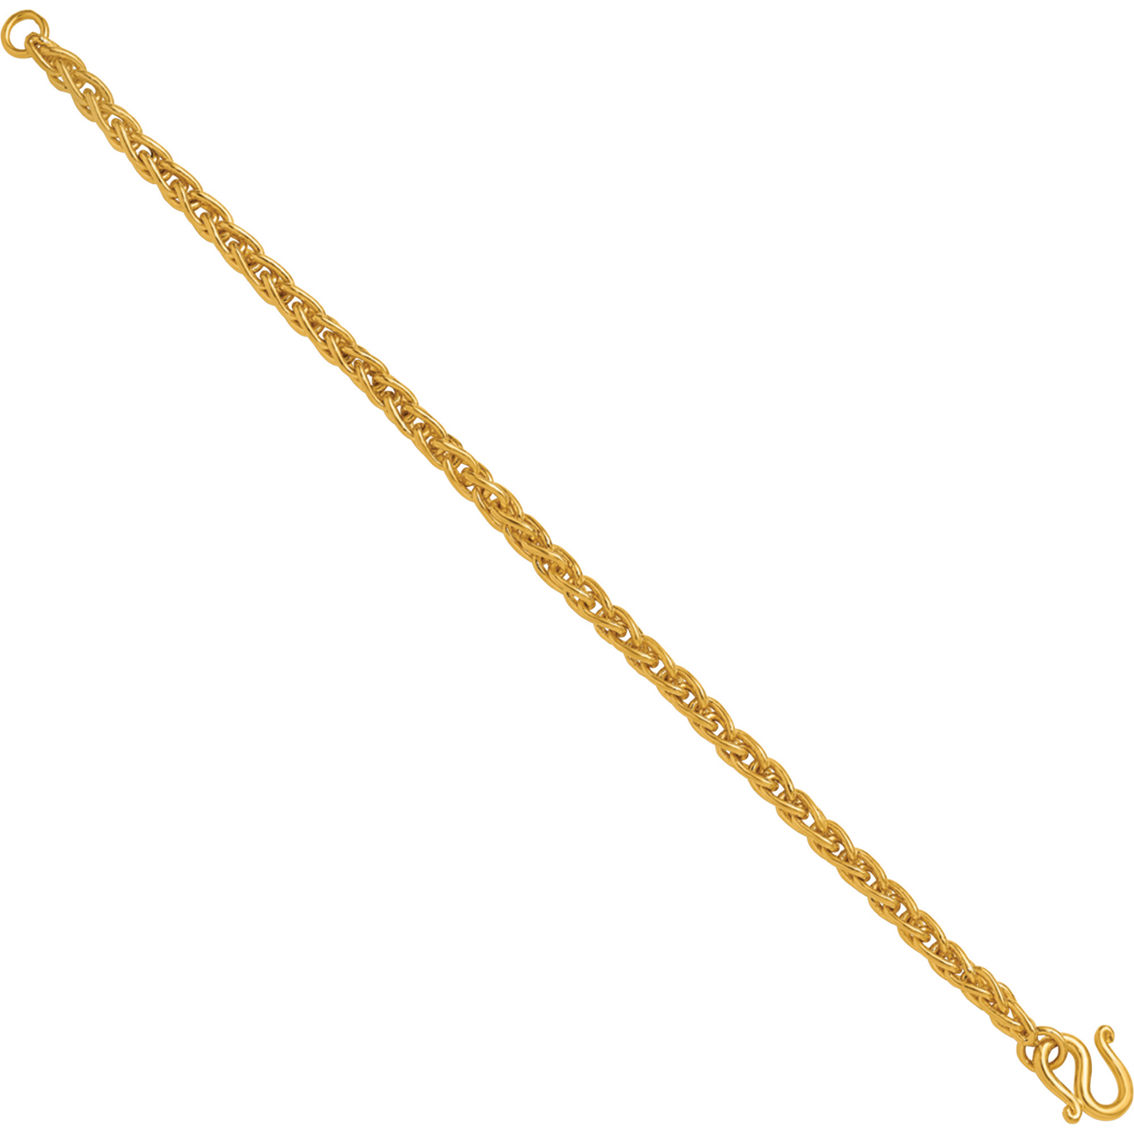 24K Pure Gold 5.2mm Solid Wheat Chain 8 in. Bracelet - Image 4 of 5